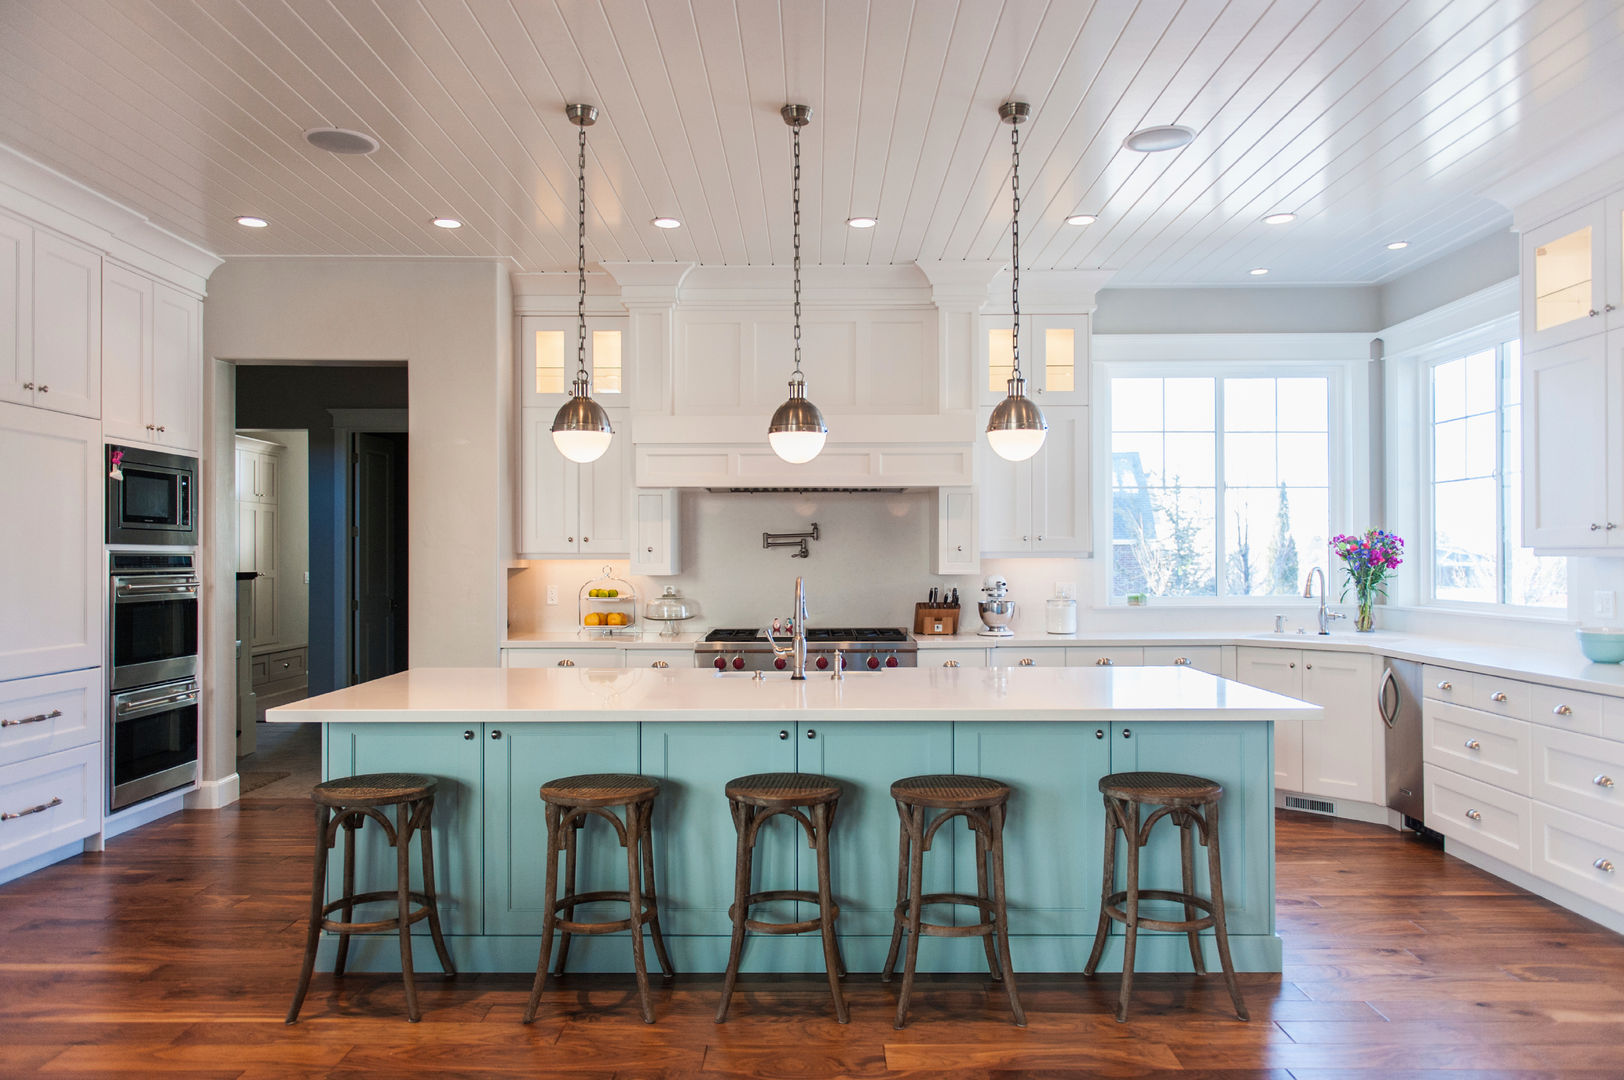 Modern Country-Style Kitchen Gracious Luxury Interiors مطبخ Country,Kitchen,Kitchen Island,Pastel,Blue,Barn,Barn Conversion